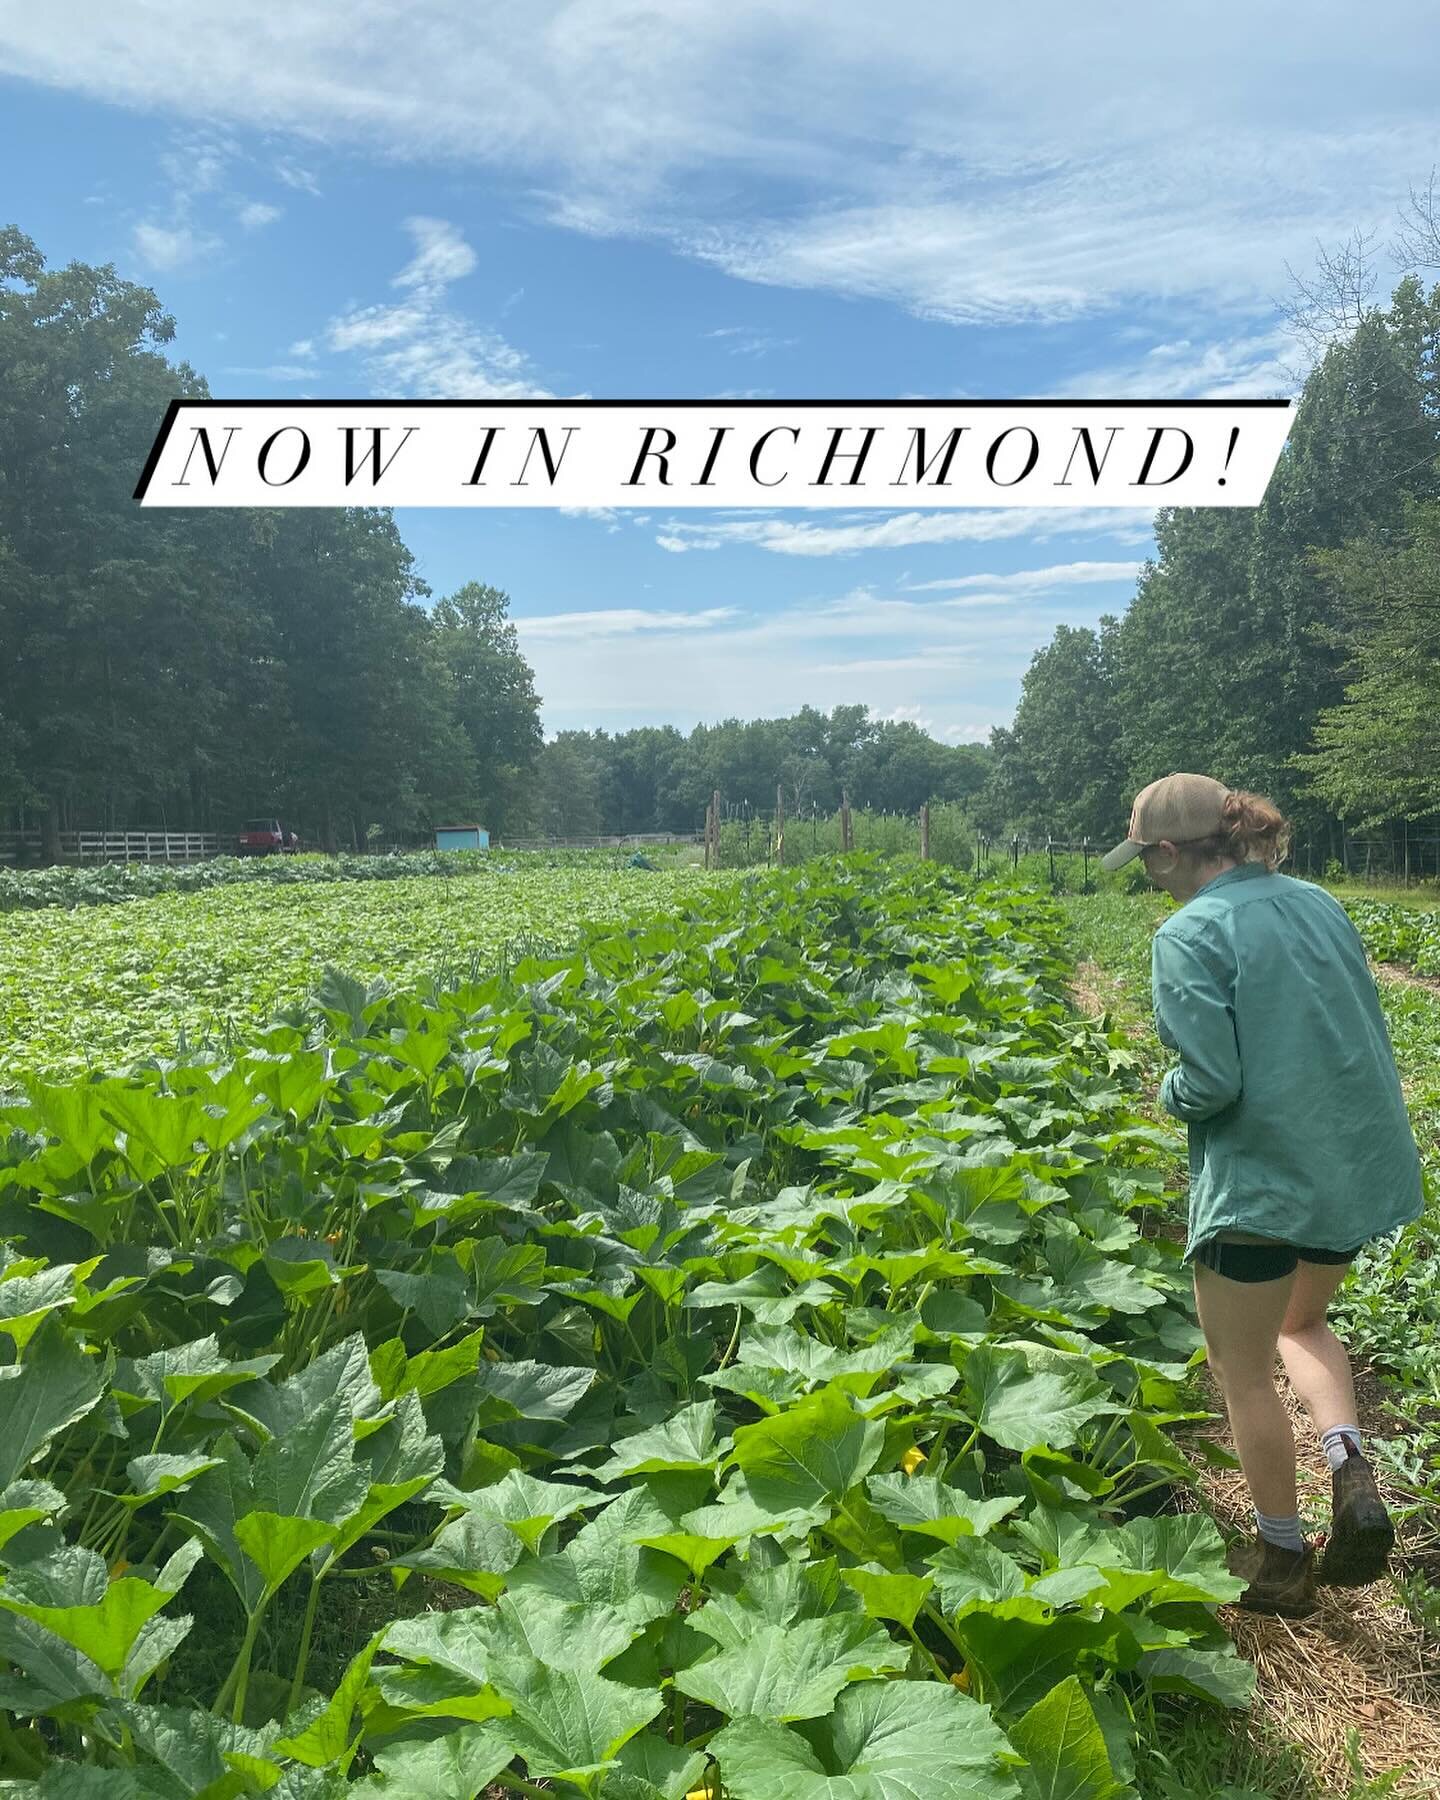 OMG we&rsquo;ll be in Richmond this season at @birdhousefarmersmarket ! The market will be a CSA pick up spot as well as a place to get our veggies and eggs a la carte. We&rsquo;re looking for another option for CSA pickup along the lines of a self-s